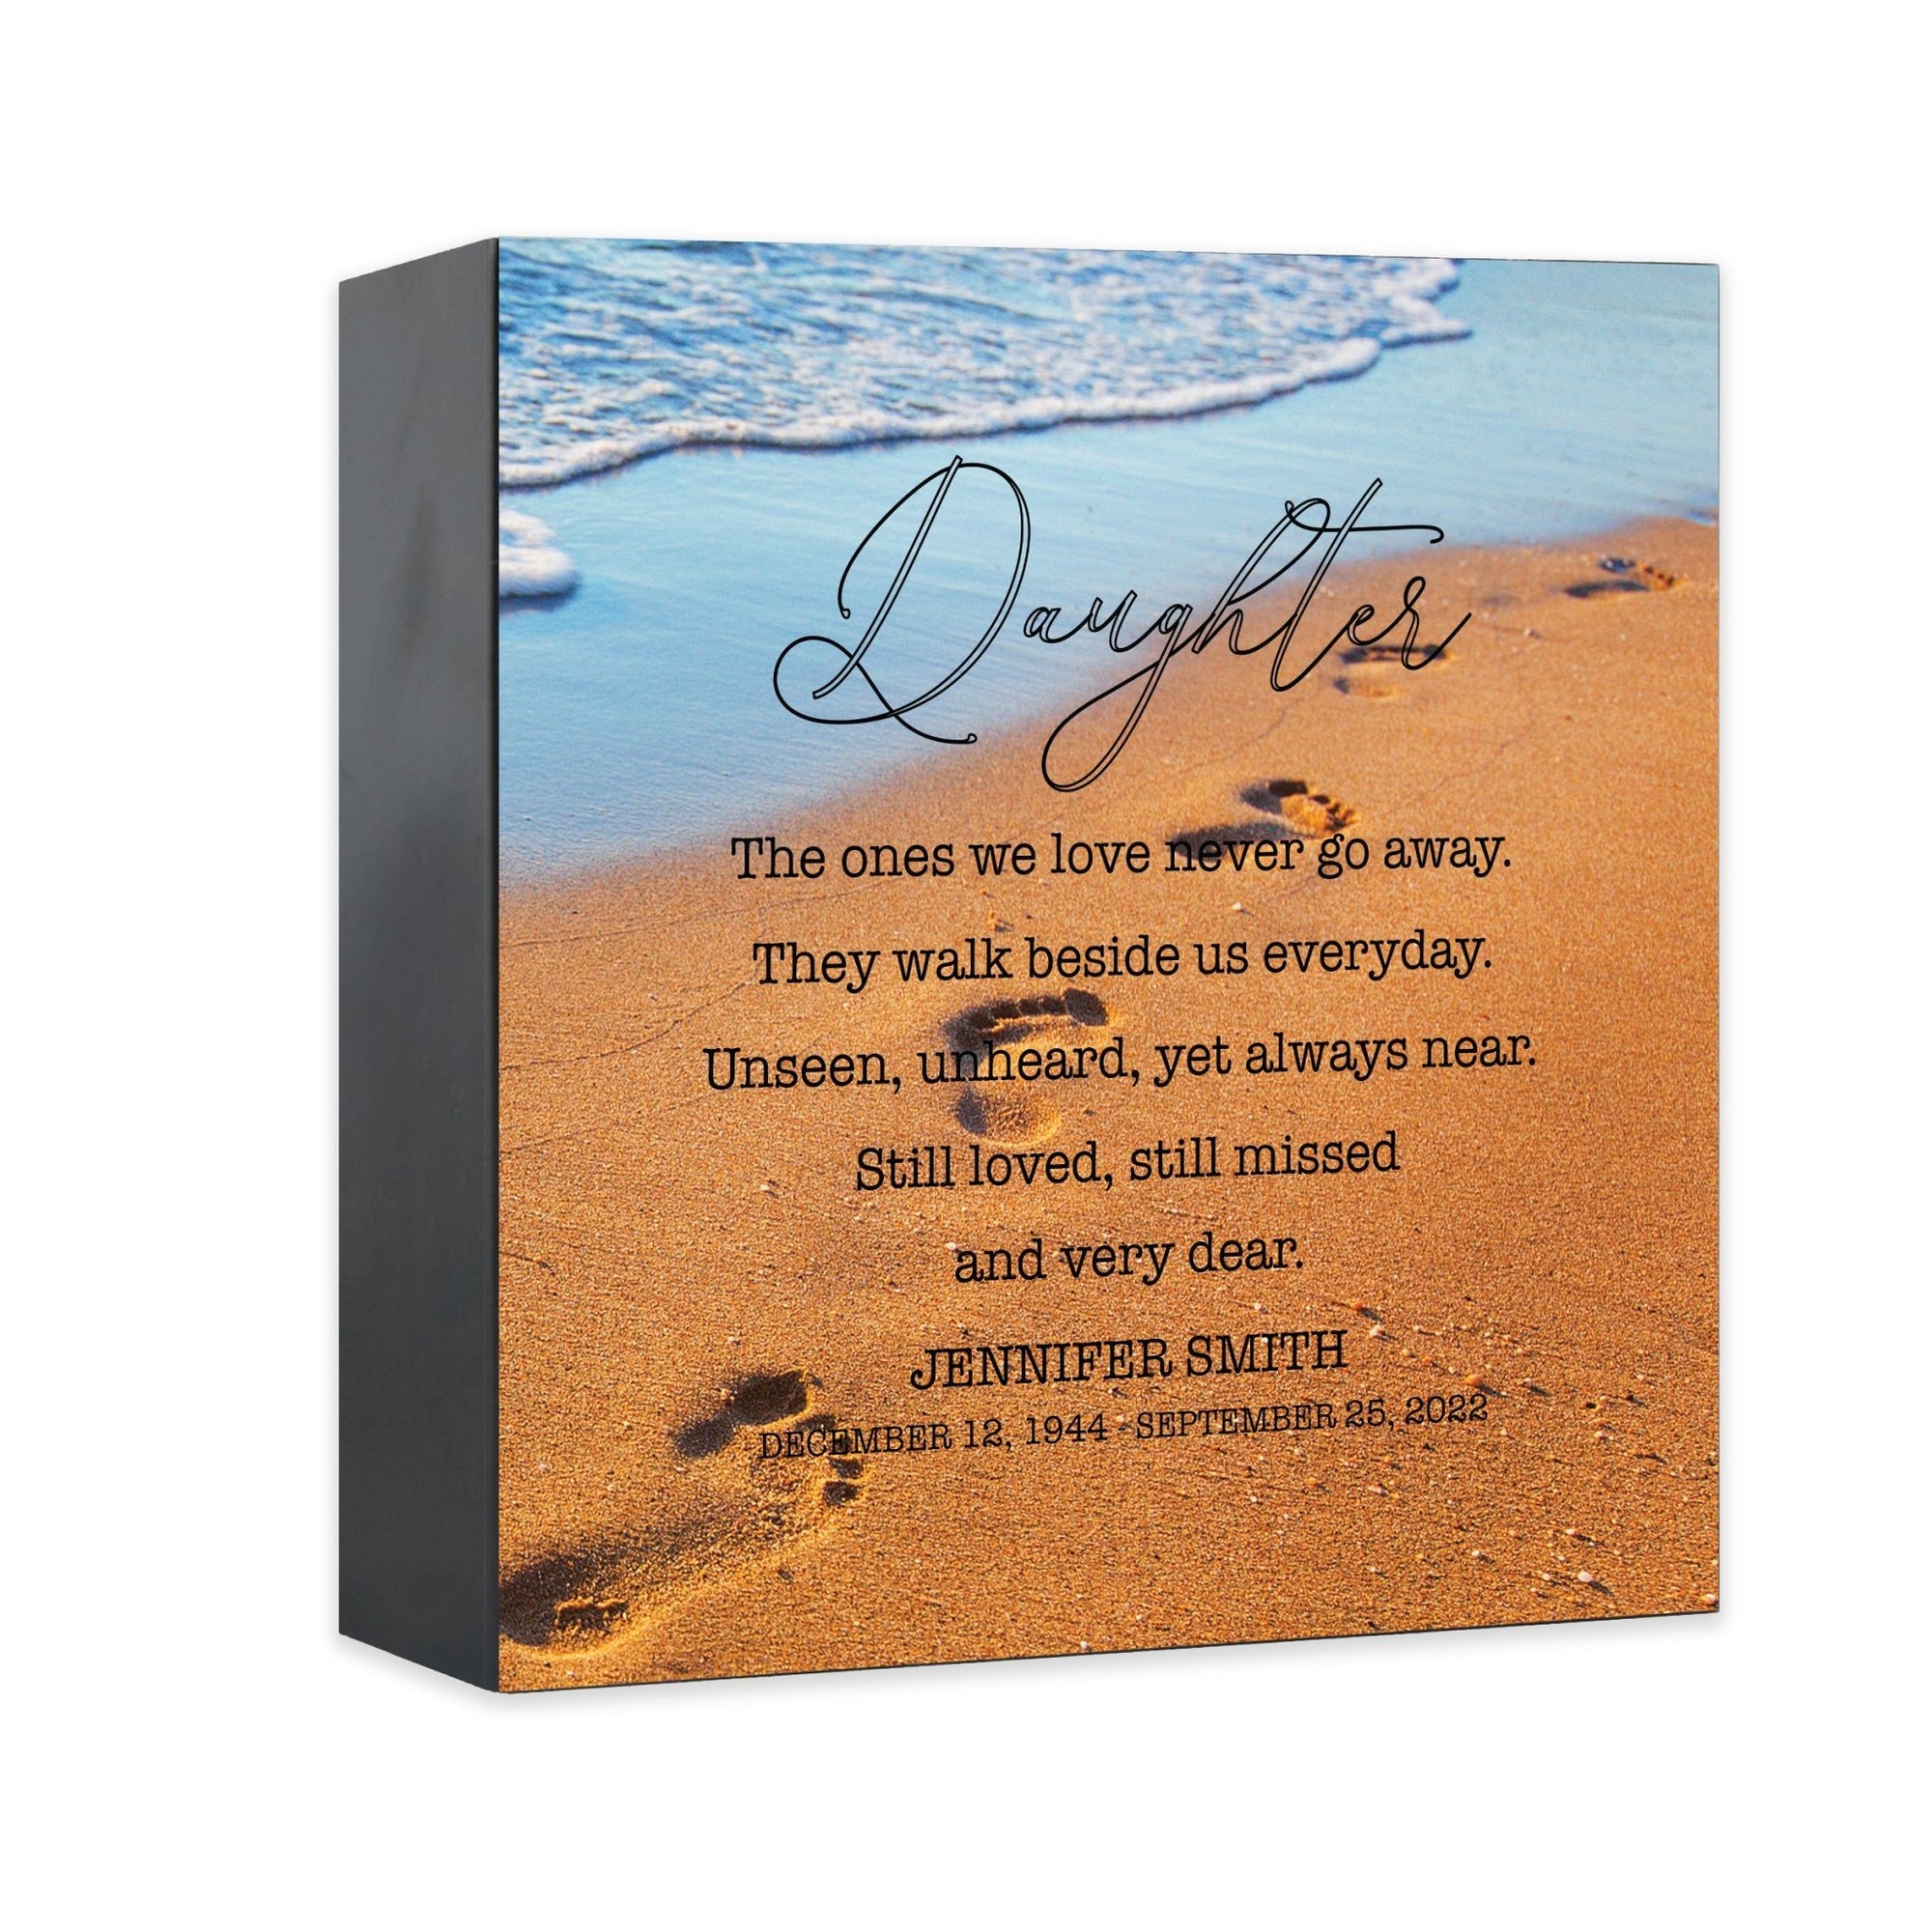 Custom Memorial Shadow Box Urn Box for Human Ashes - The Ones We Love - LifeSong Milestones